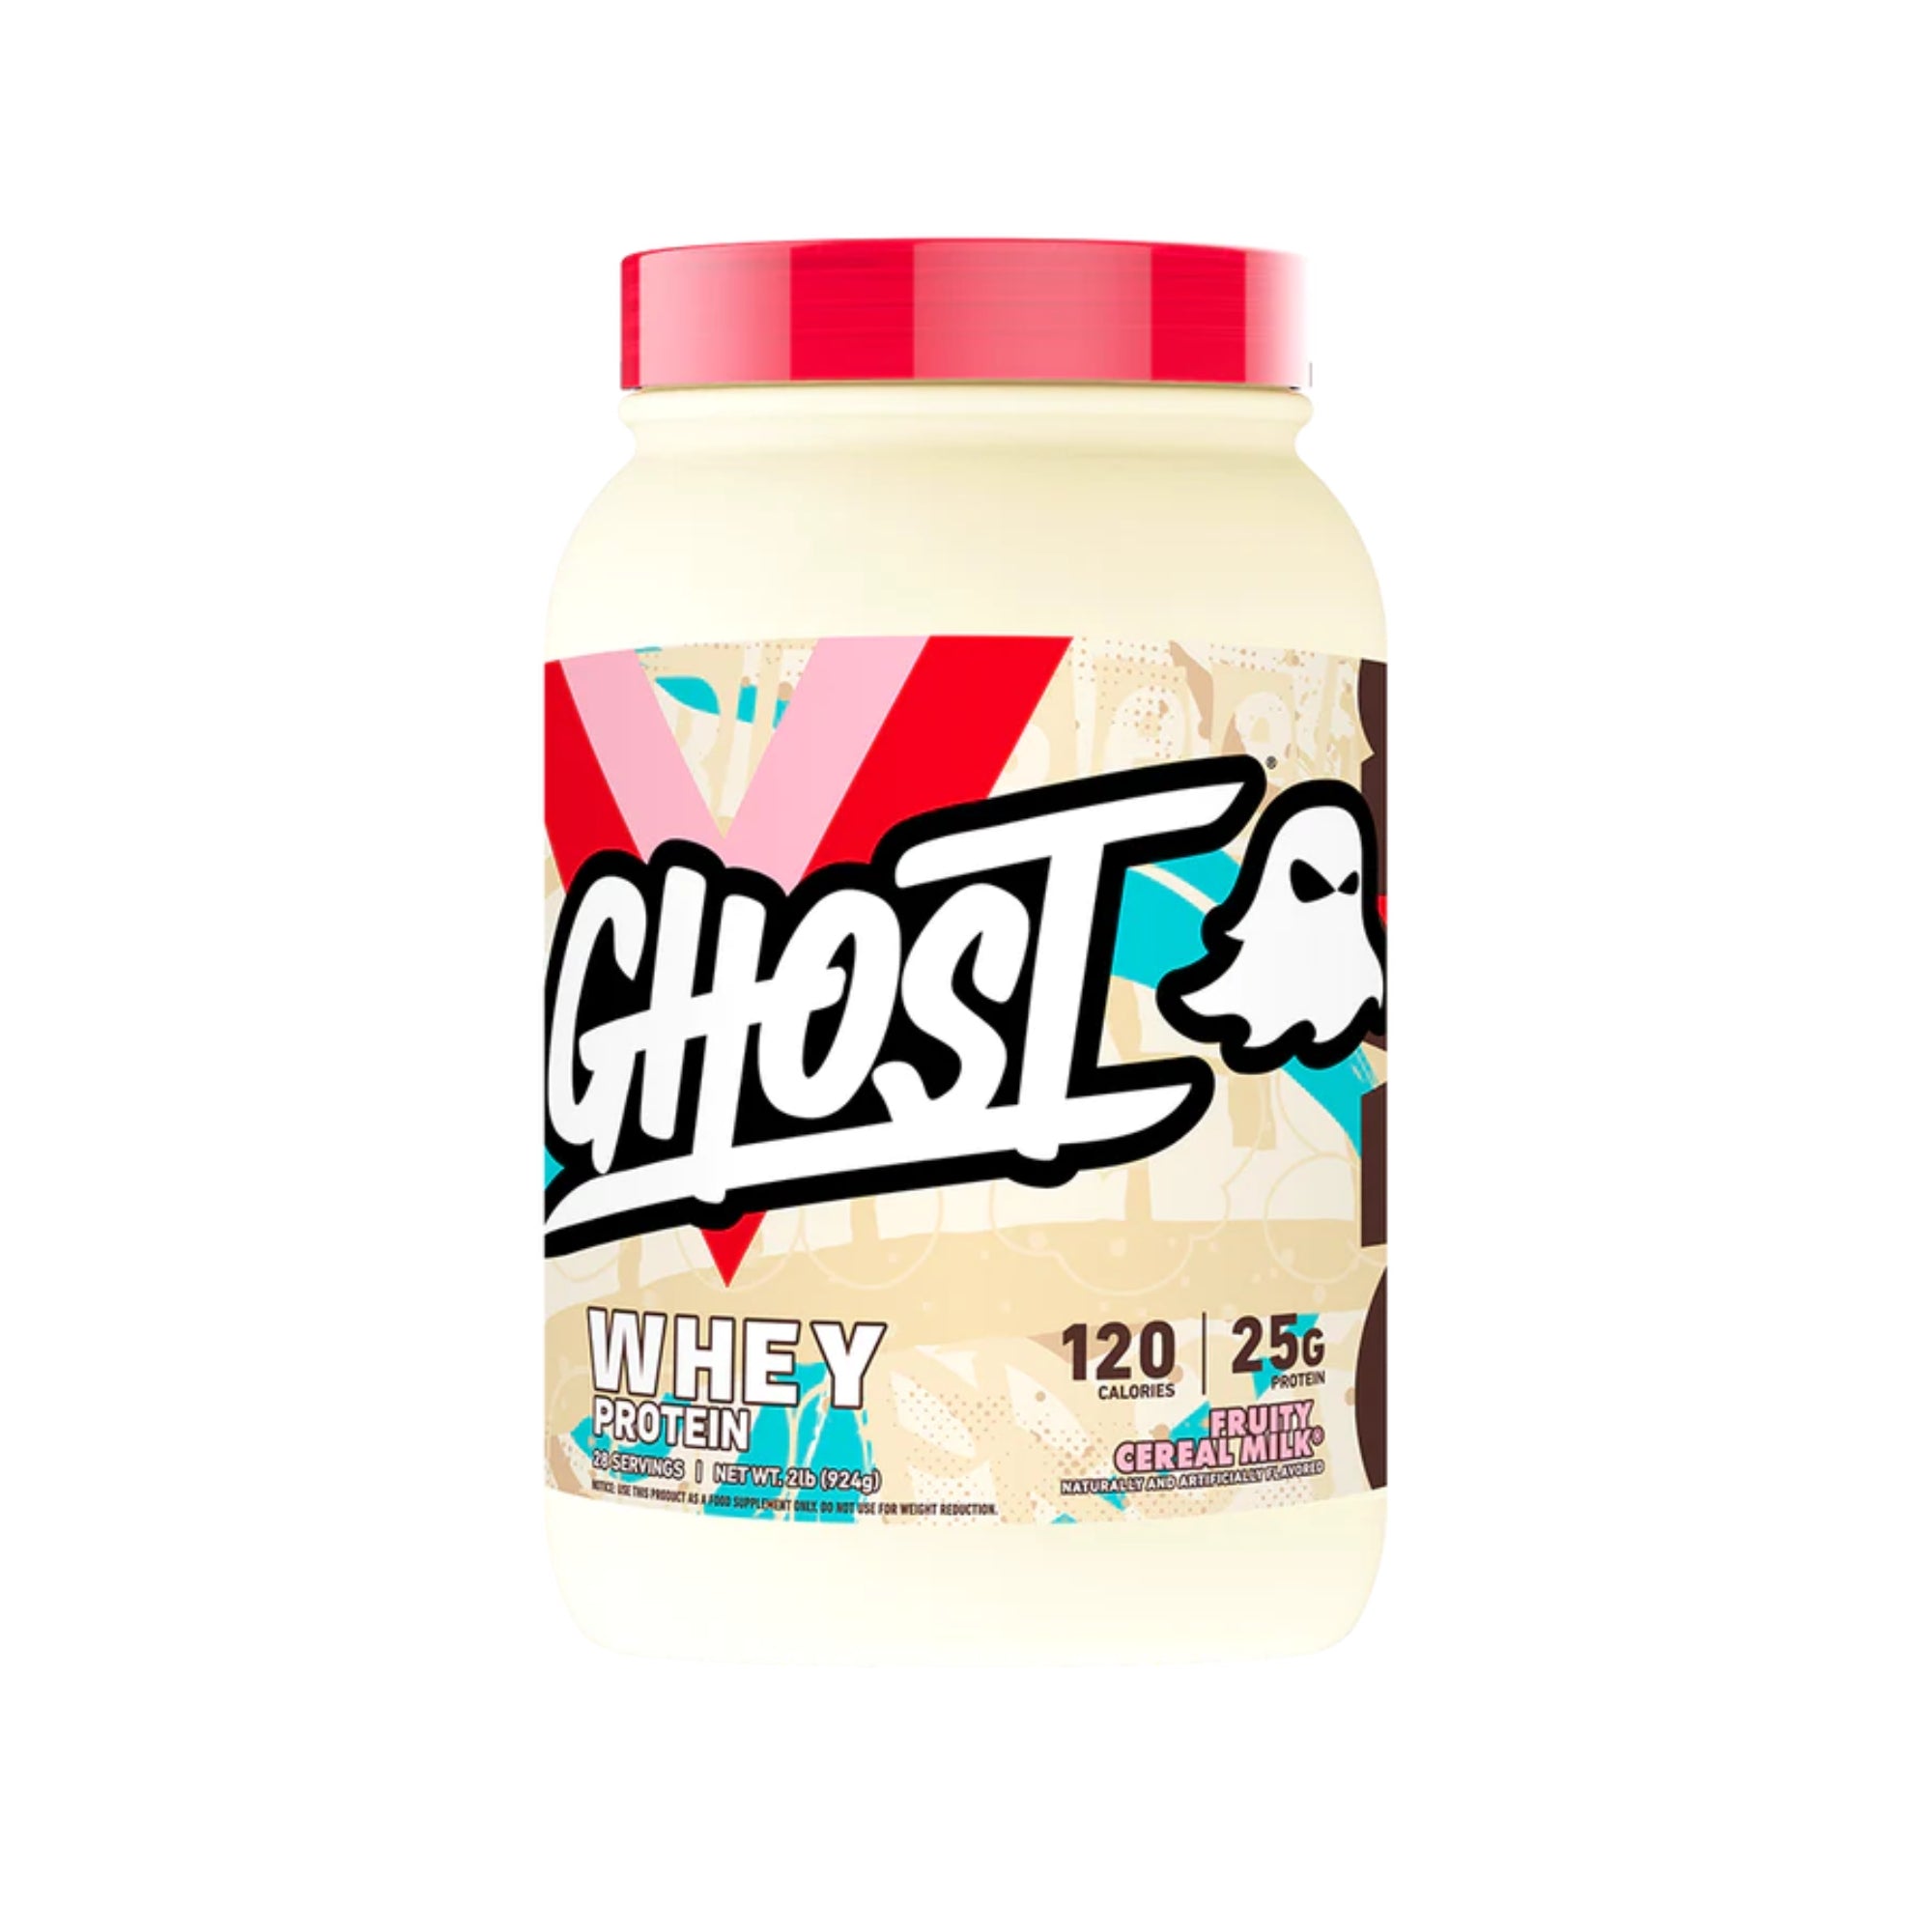 Ghost Whey - Fruity Milk Cereal